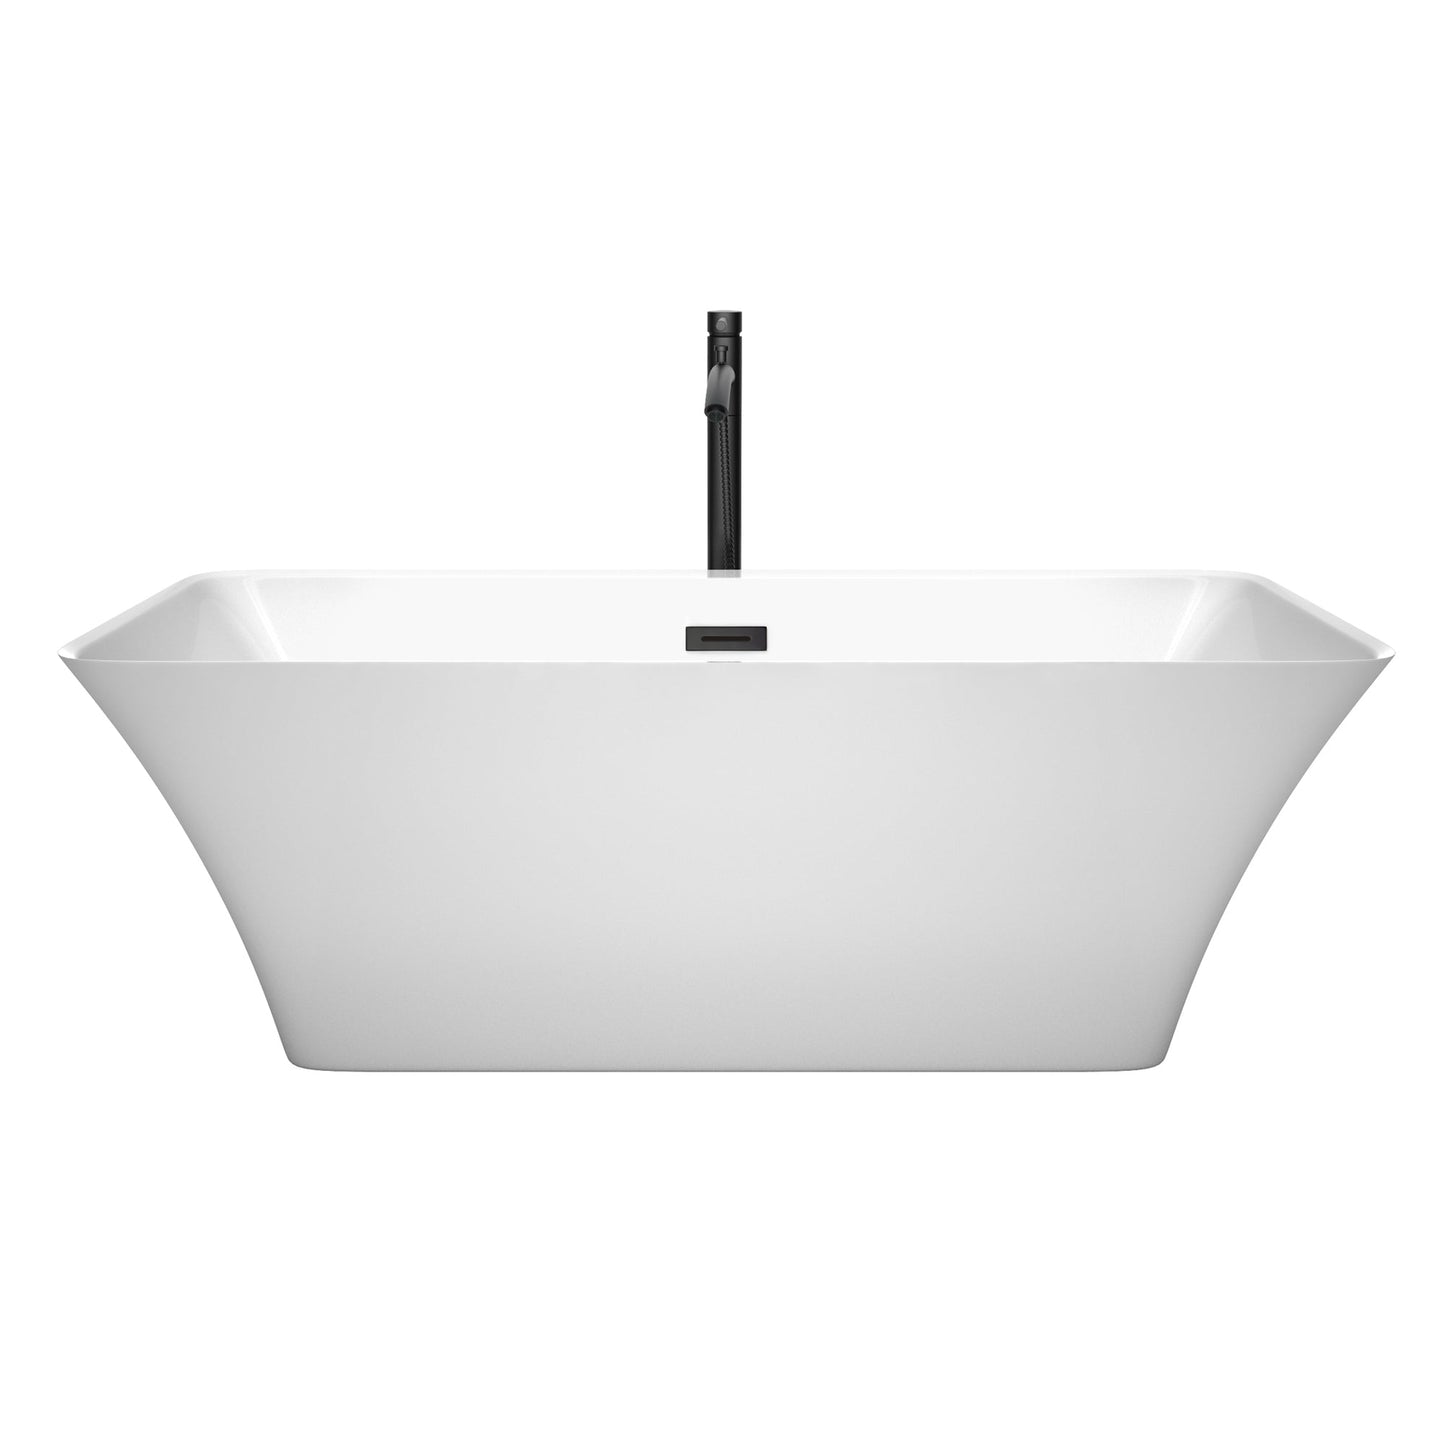 Wyndham Collection Tiffany 67" Freestanding Bathtub in White With Floor Mounted Faucet, Drain and Overflow Trim in Matte Black